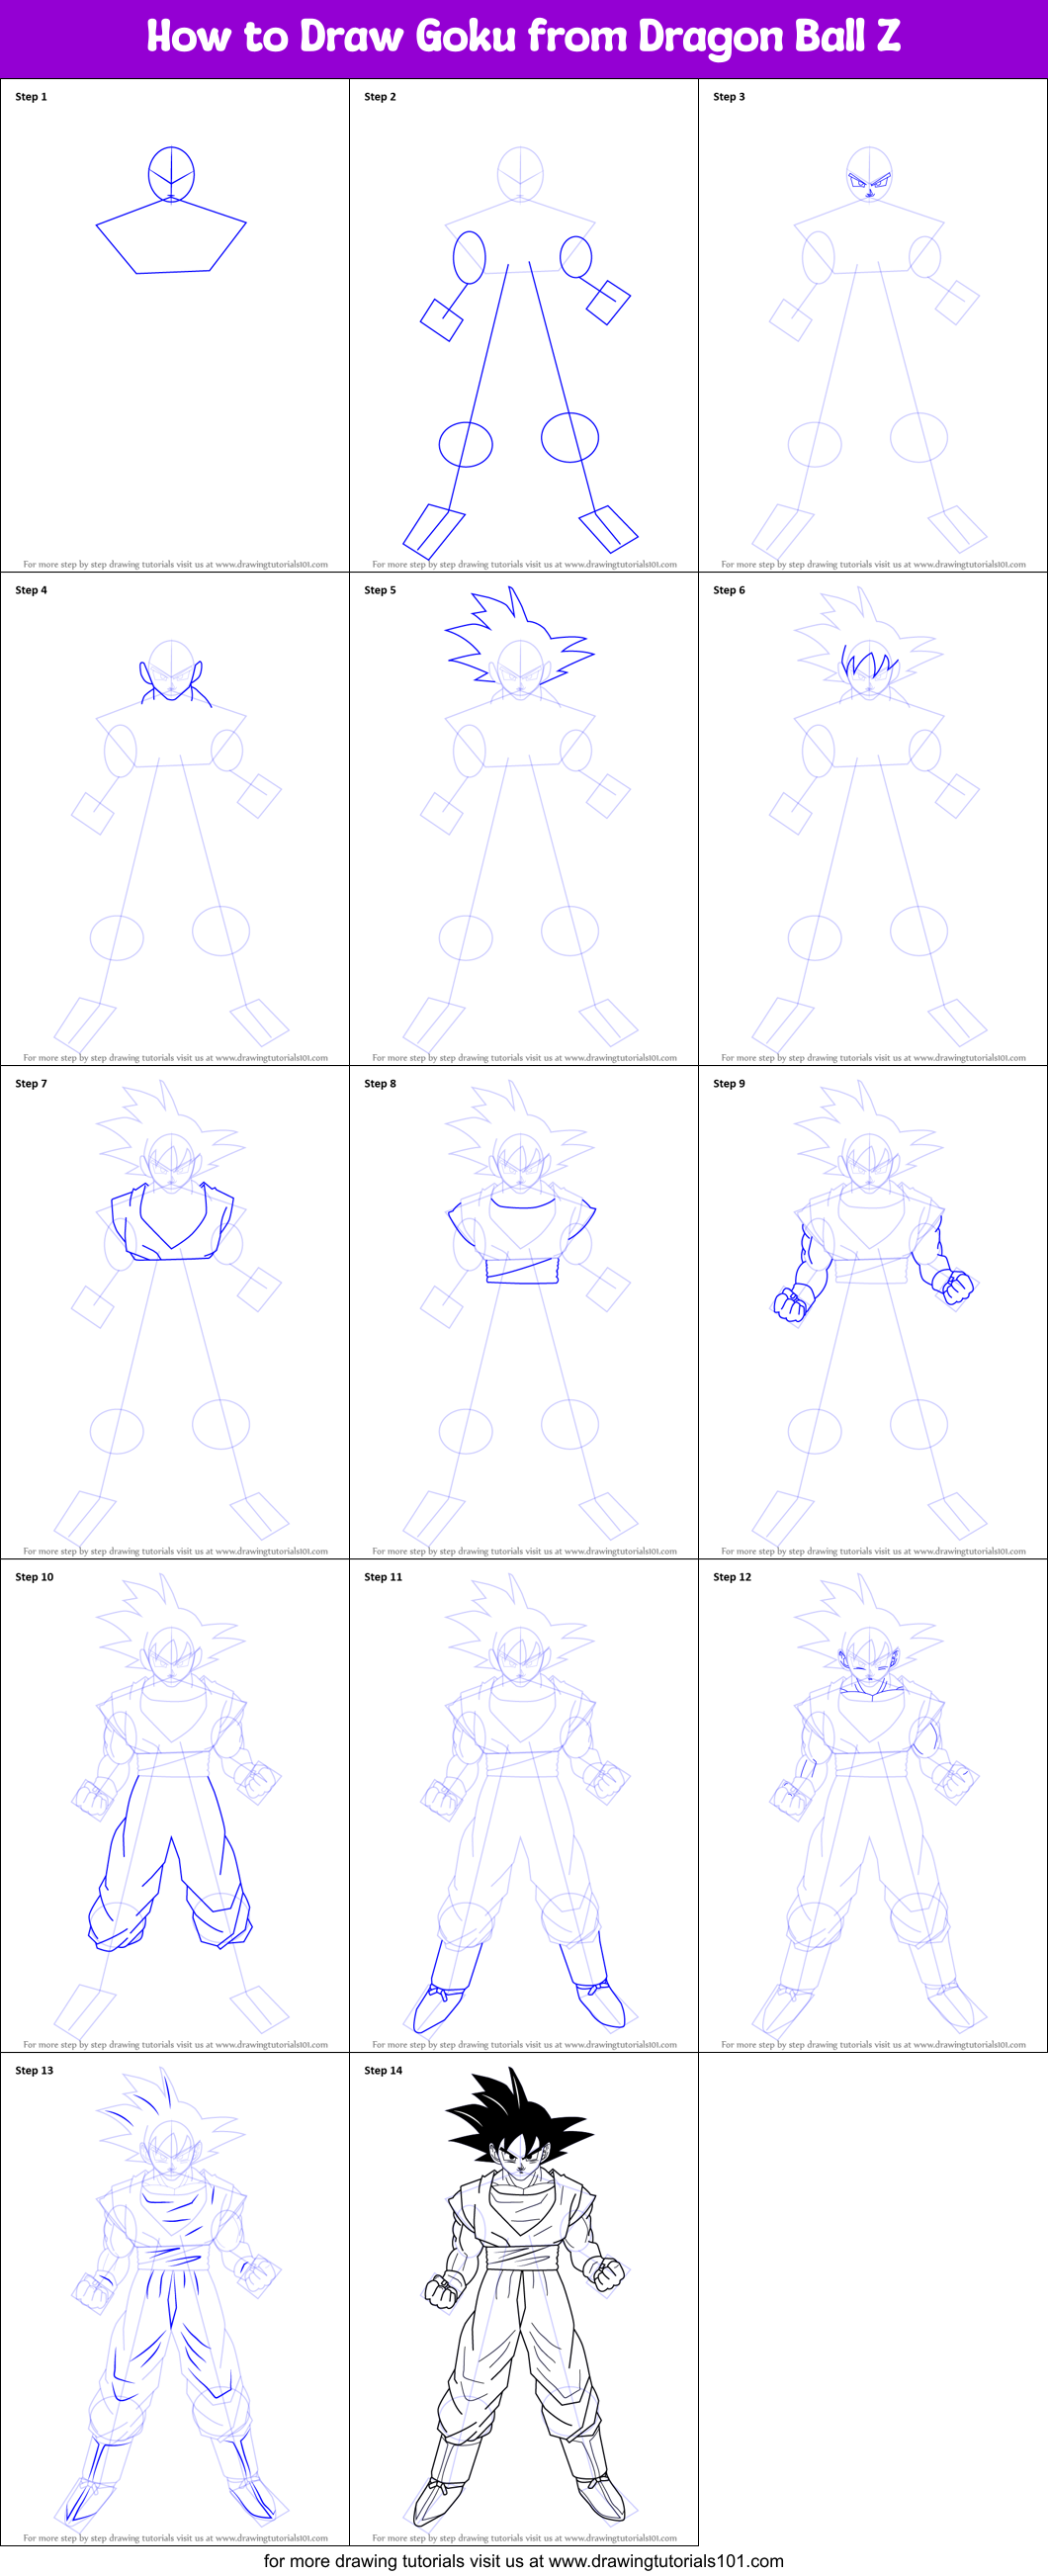 How To Draw Son Goku From Dragon Ball Z Printable Step By Step Drawing